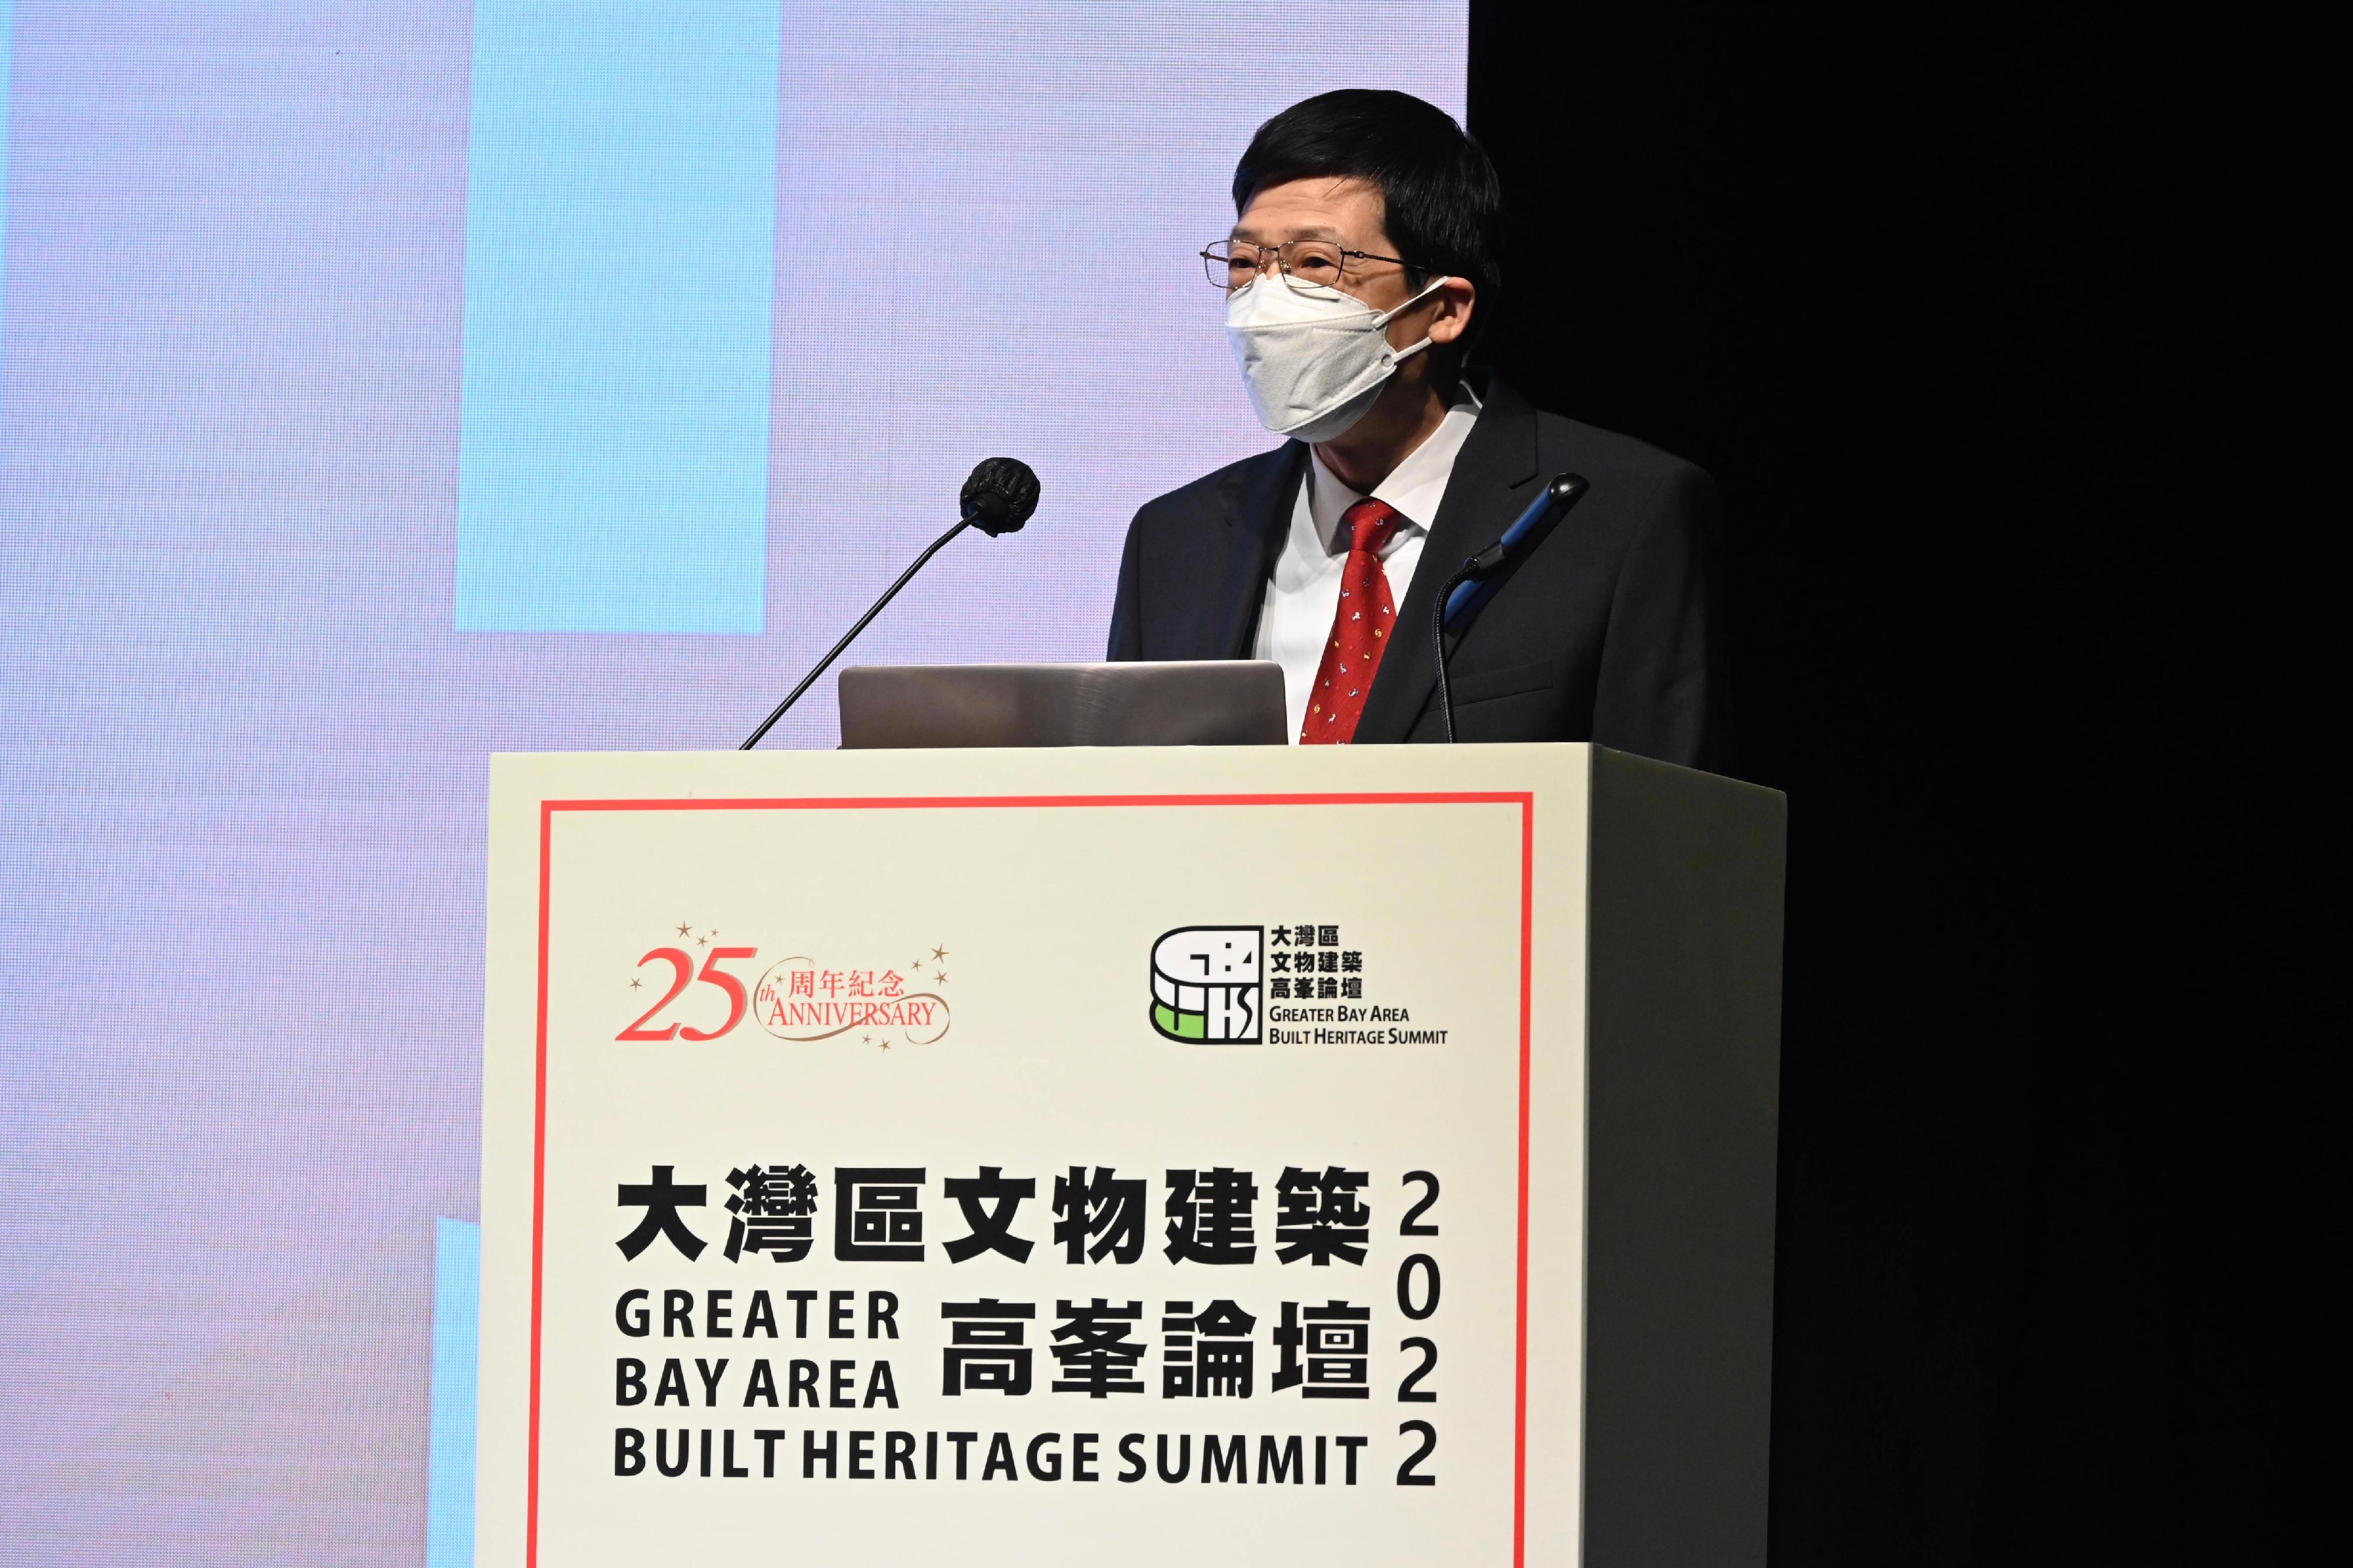 Jointly organised by the Commissioner for Heritage's Office and the Antiquities and Monuments Office under the Development Bureau, the Greater Bay Area Built Heritage Summit 2022 opened at Hong Kong City Hall today (November 9). Photo shows Deputy Administrator of the National Cultural Heritage Administration Mr Lu Jin speaking at the opening ceremony.